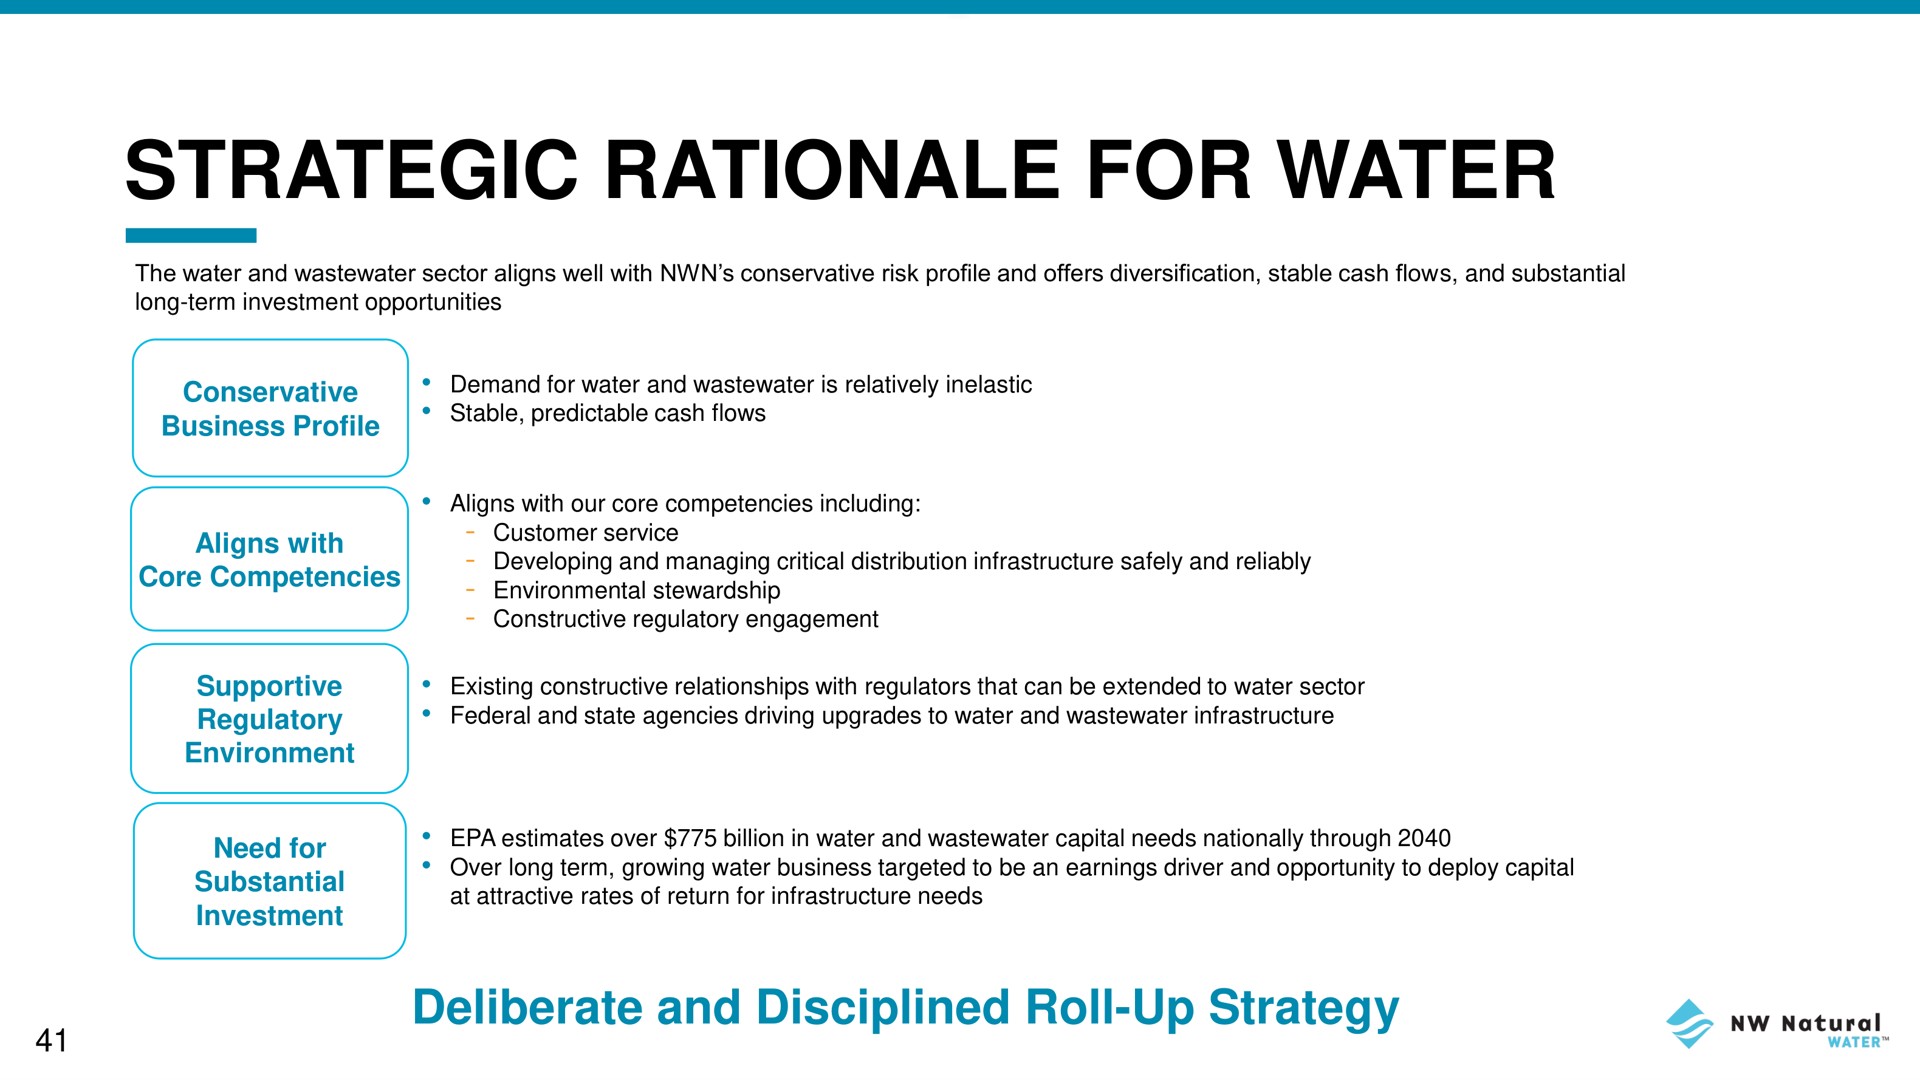 strategic rationale for water | NW Natural Holdings